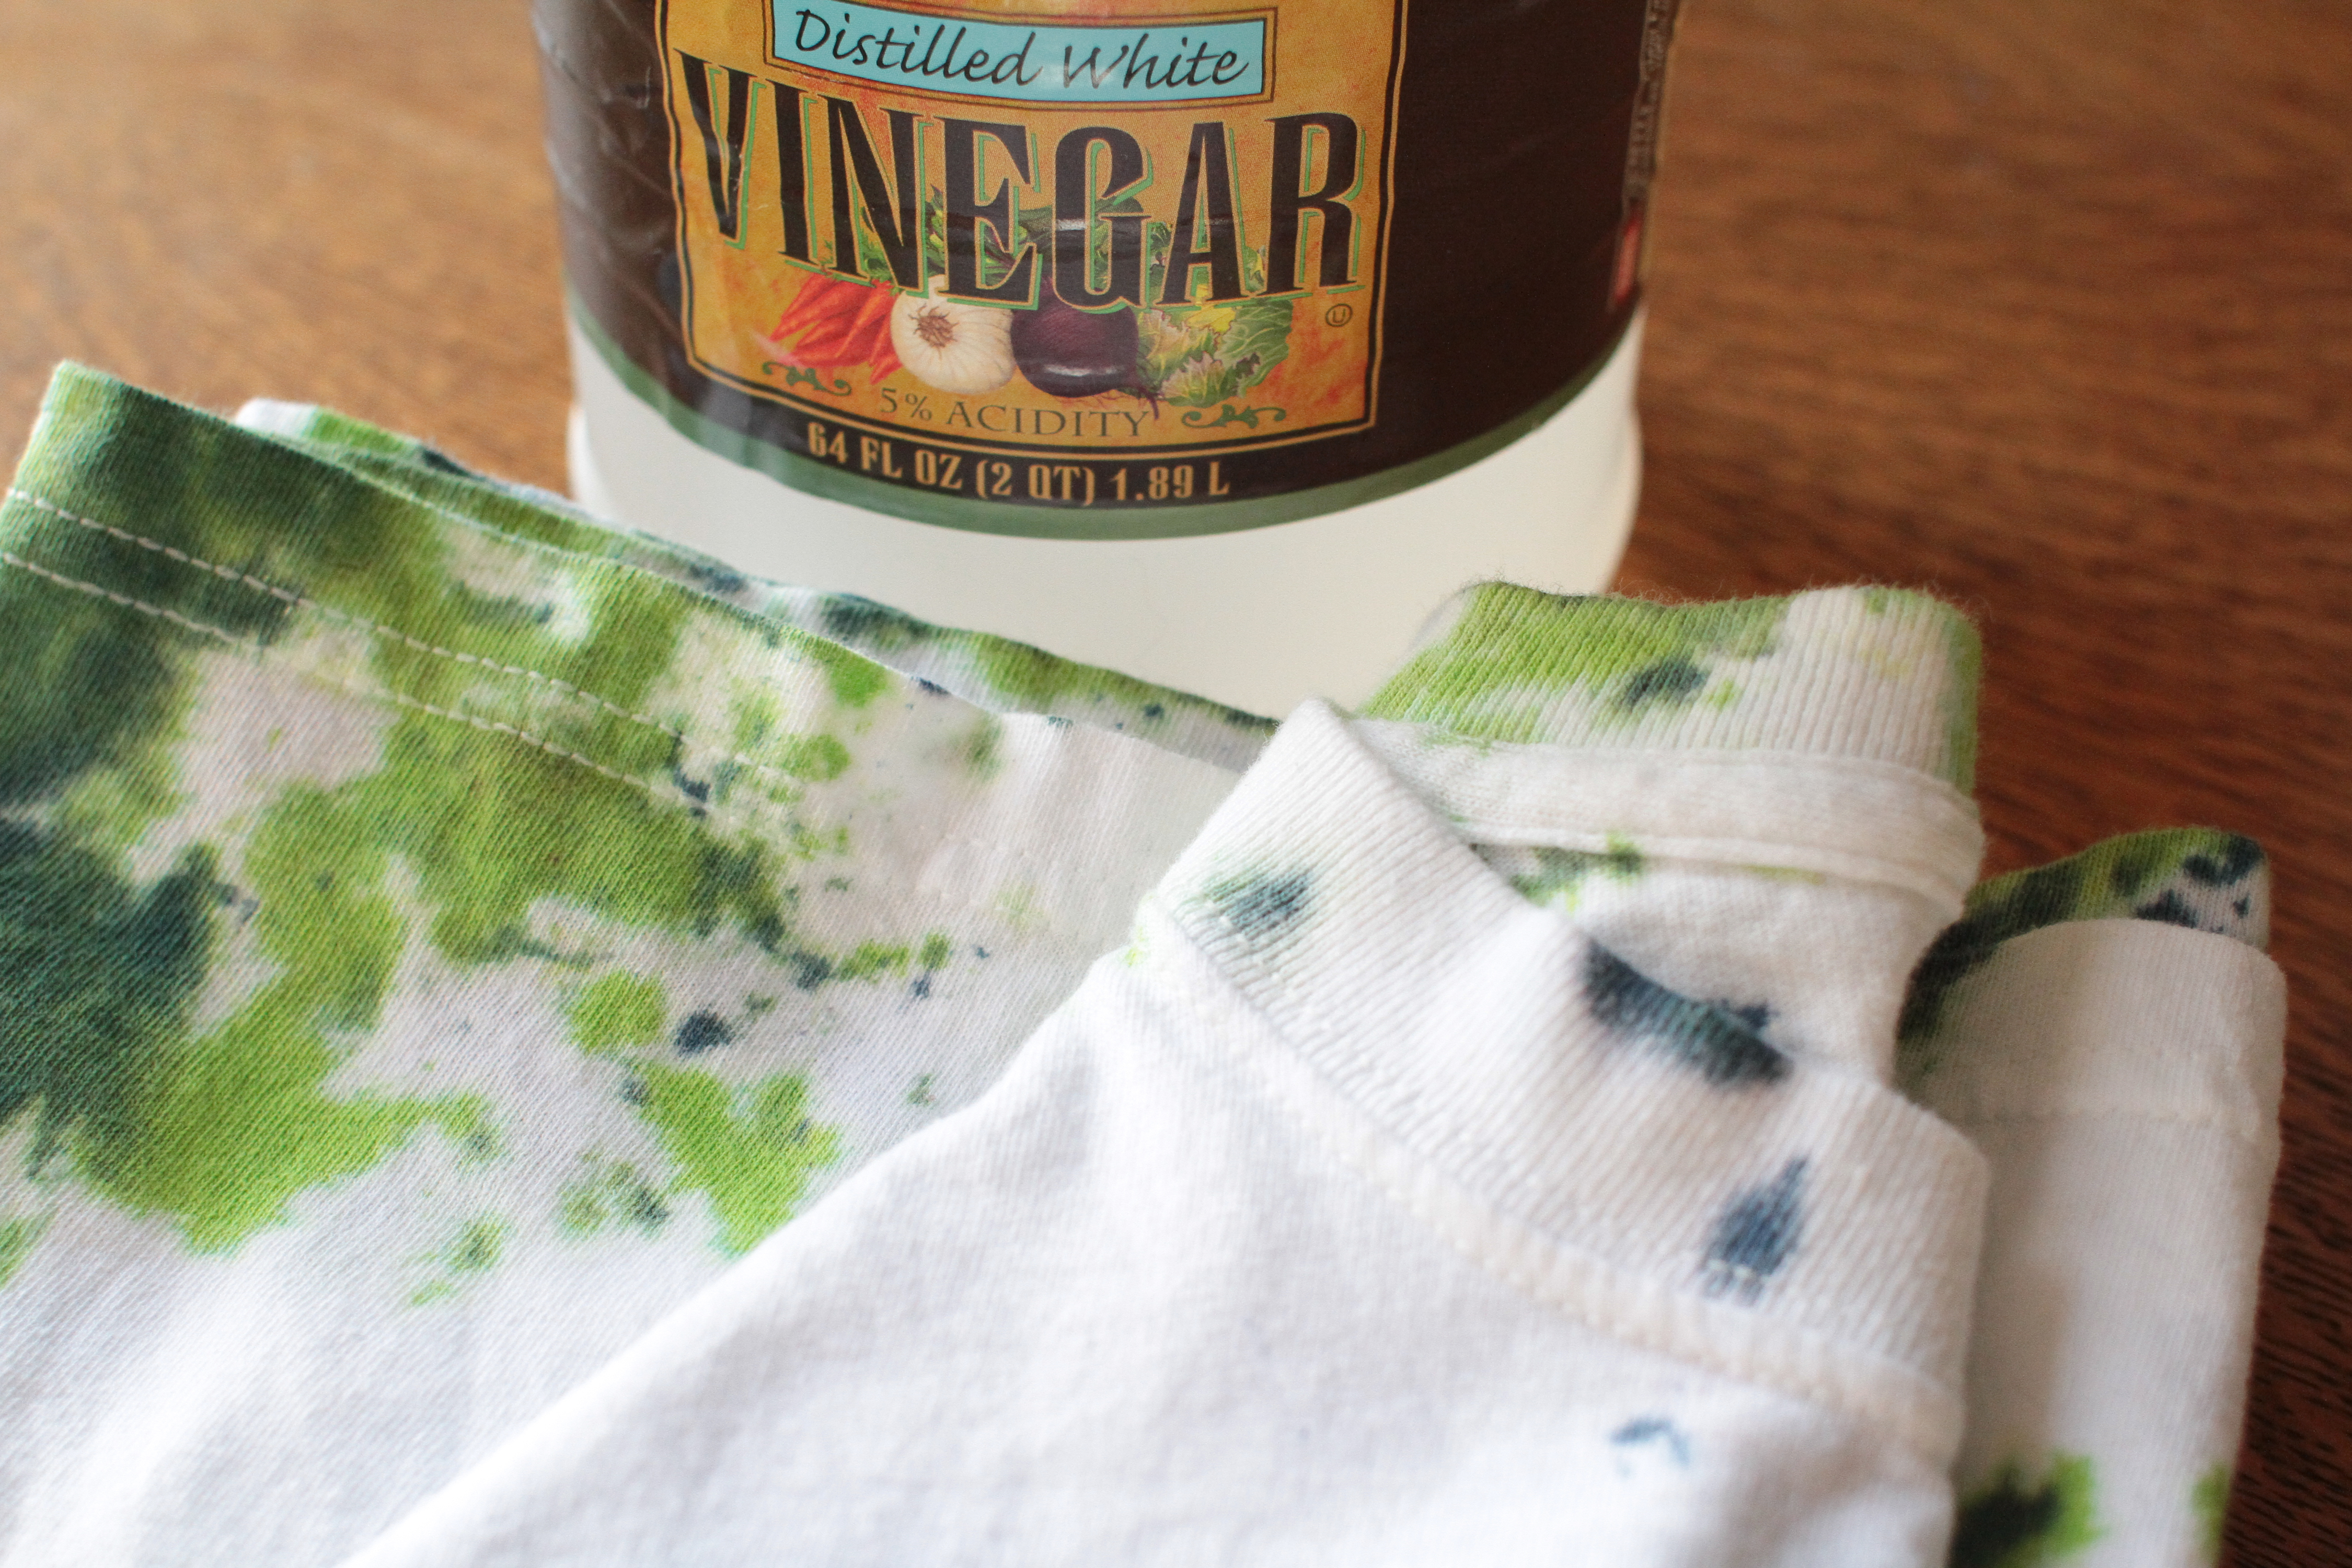 Safest Way to Remove Dye Transfer Stains From Colored & White Clothes With  Vinegar